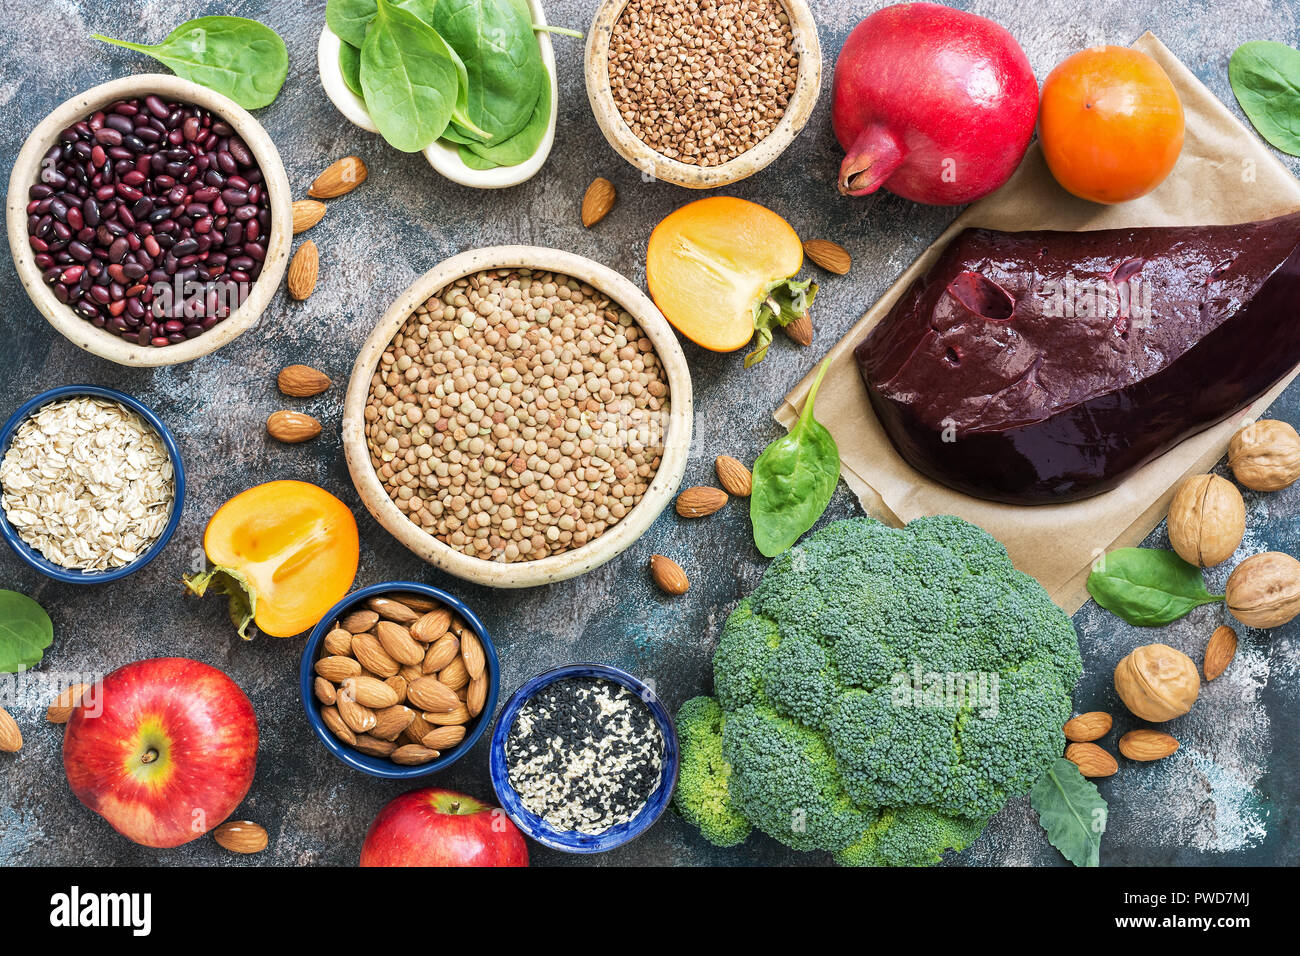 Foods high in iron. liver, broccoli, persimmon, apples, nuts, legumes, spinach, pomegranate. Top view, flat lay Stock Photo